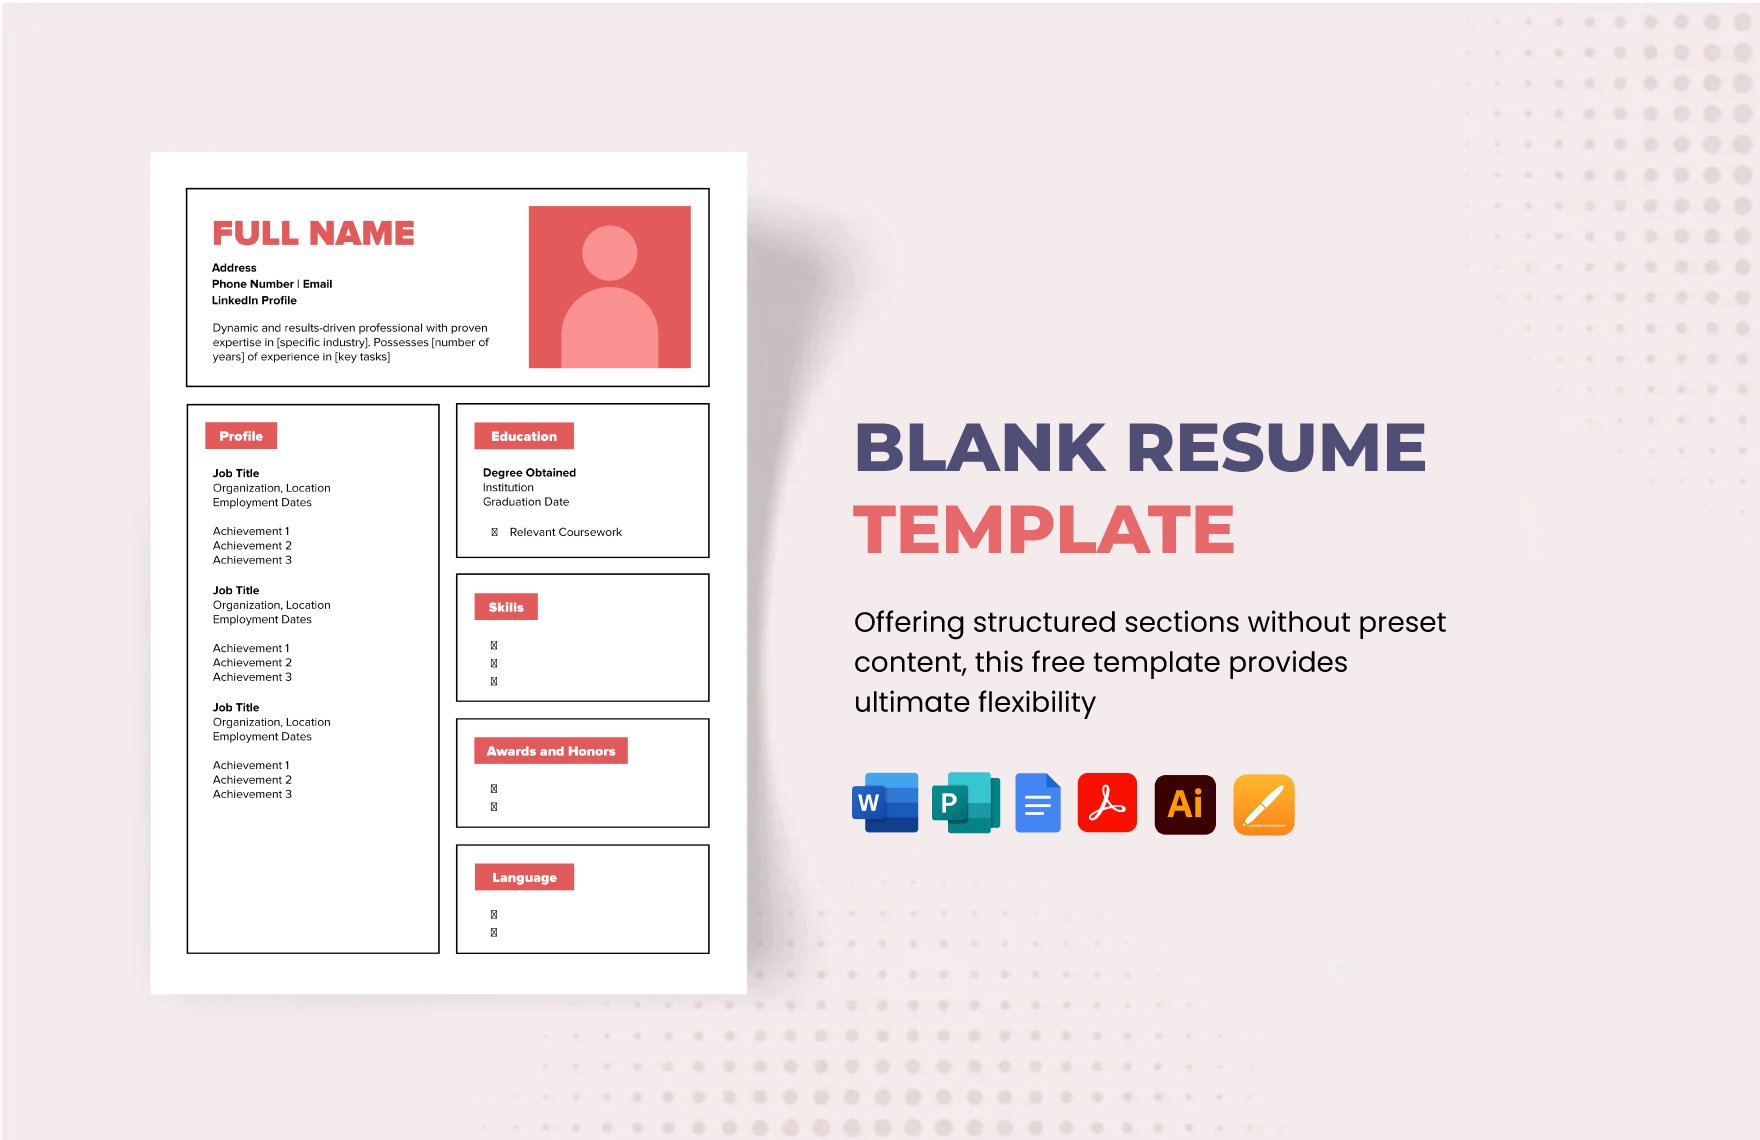 Free Blank Resume Template in Word, Google Docs, PDF, Illustrator, Apple Pages, Publisher